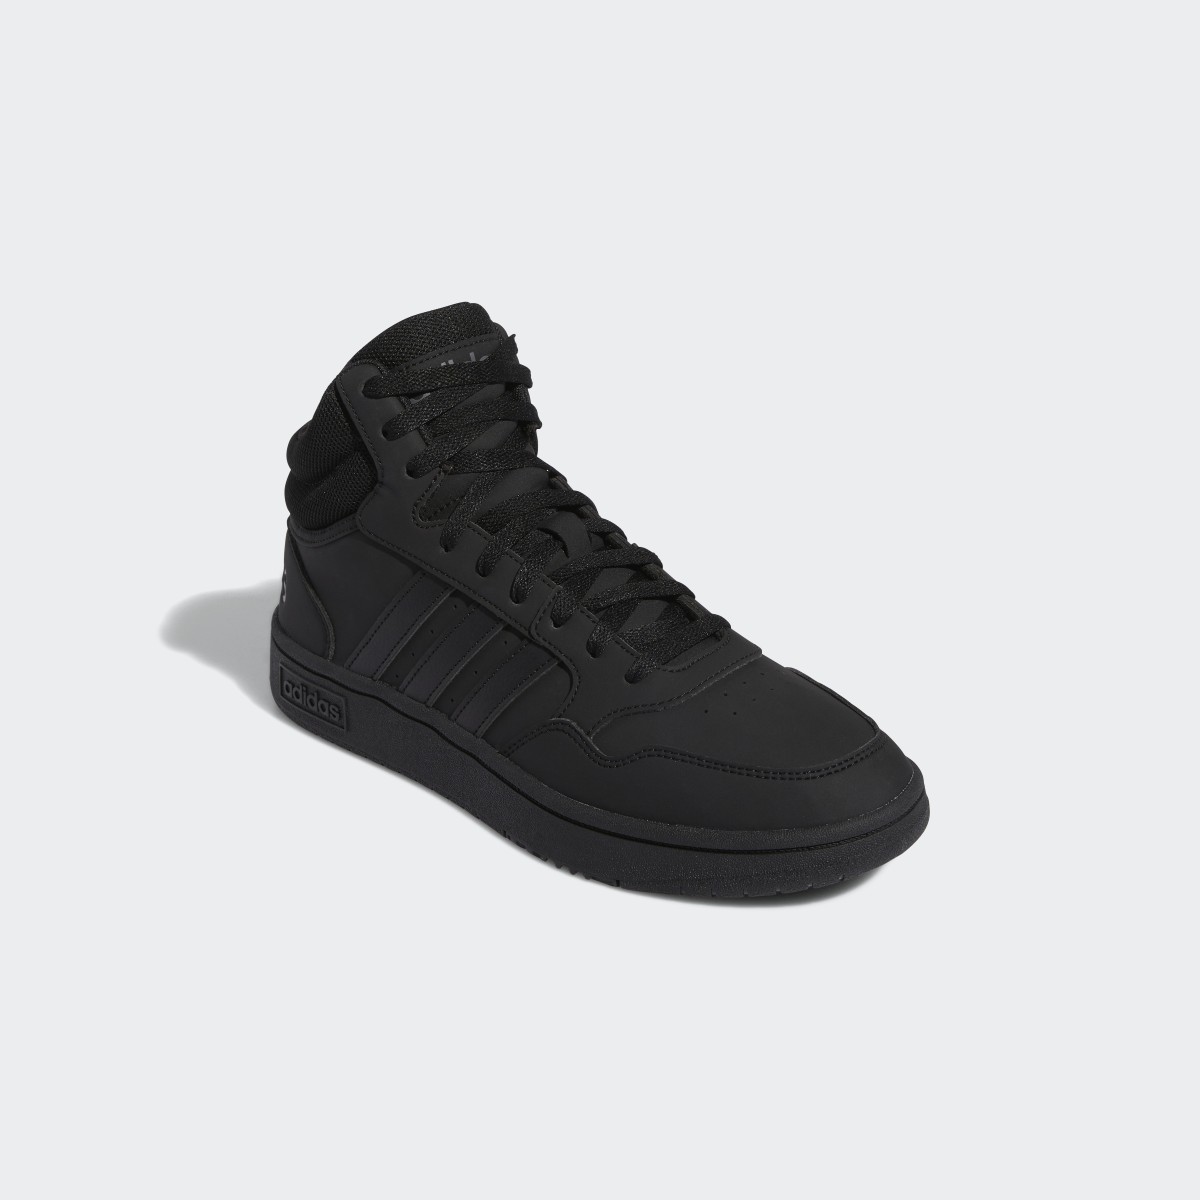 Adidas Hoops 3 Mid Lifestyle Basketball Mid Classic Schuh. 5